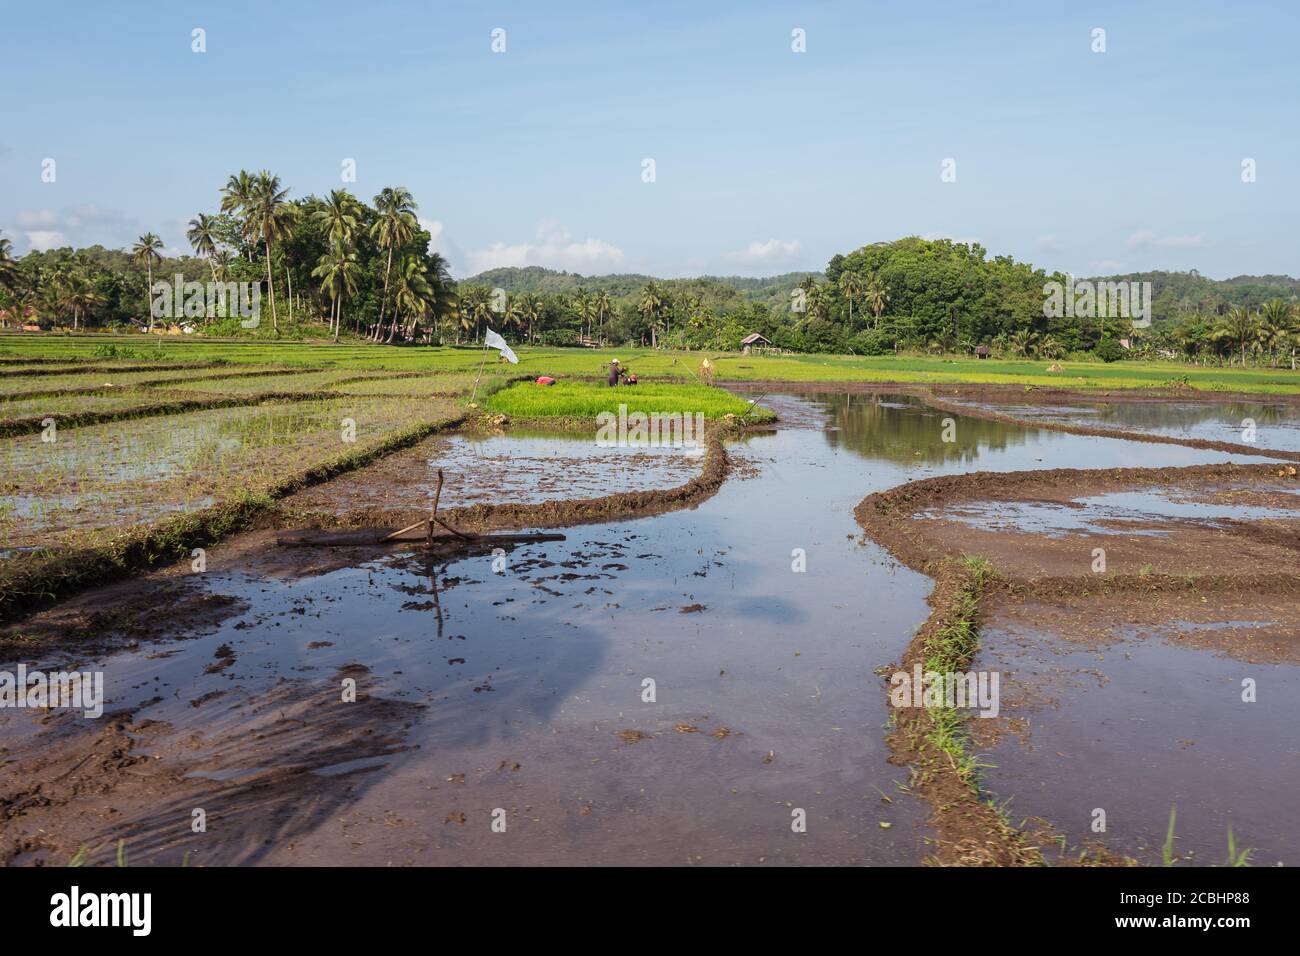 Bohol / Philippines - July 18, 2019: beautiful green rice fields flooded with water with farmers working in the background Stock Photo